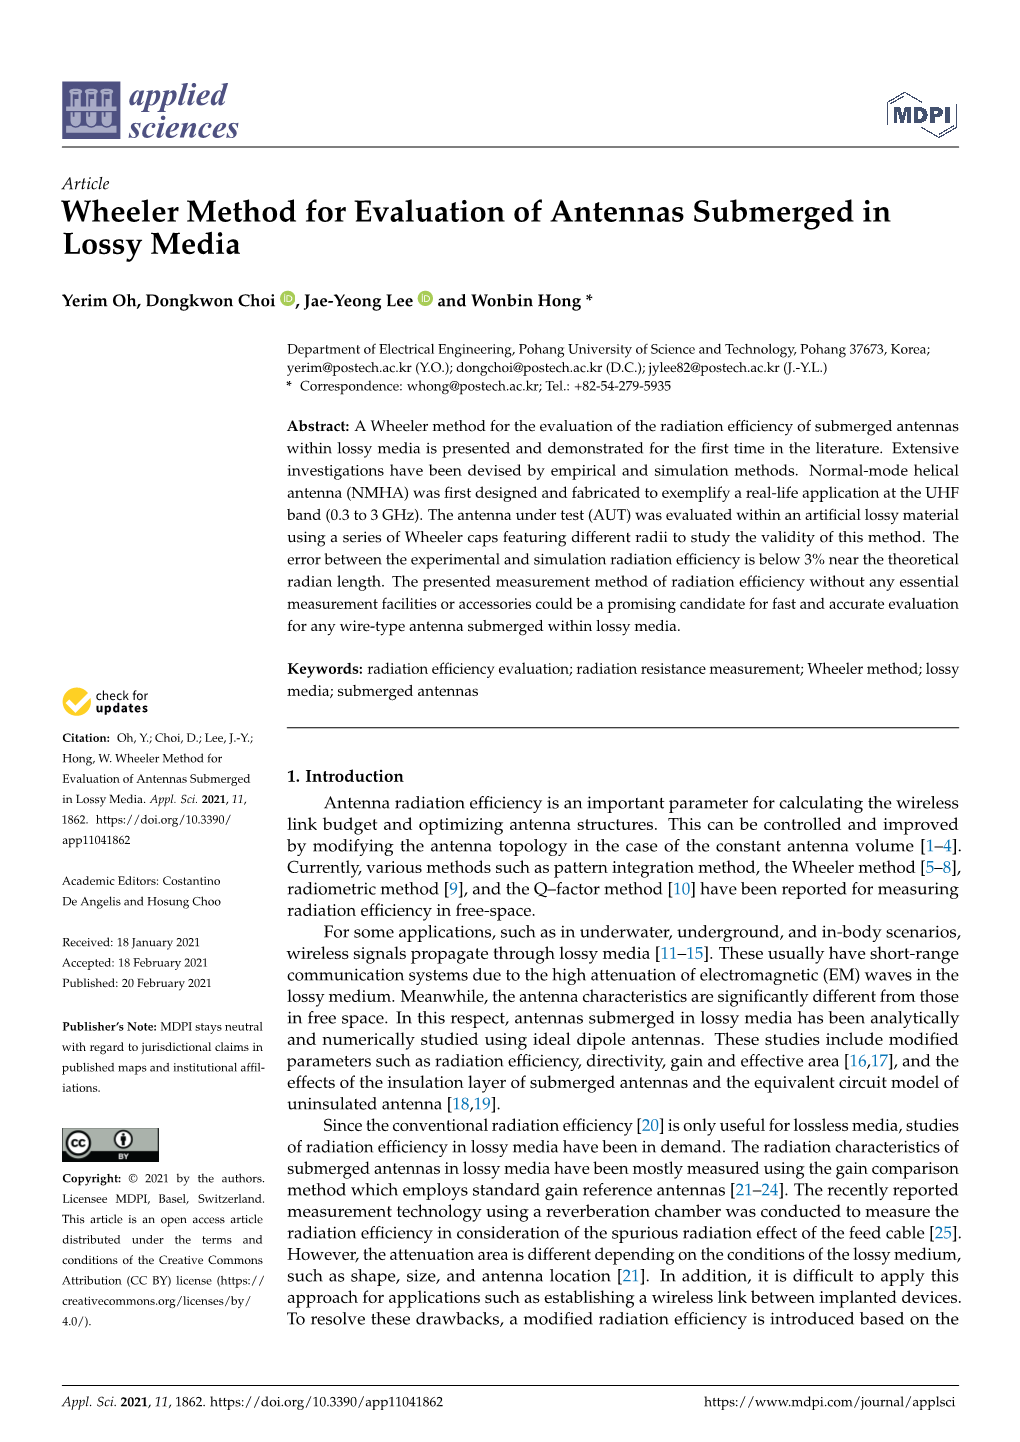 Wheeler Method for Evaluation of Antennas Submerged in Lossy Media